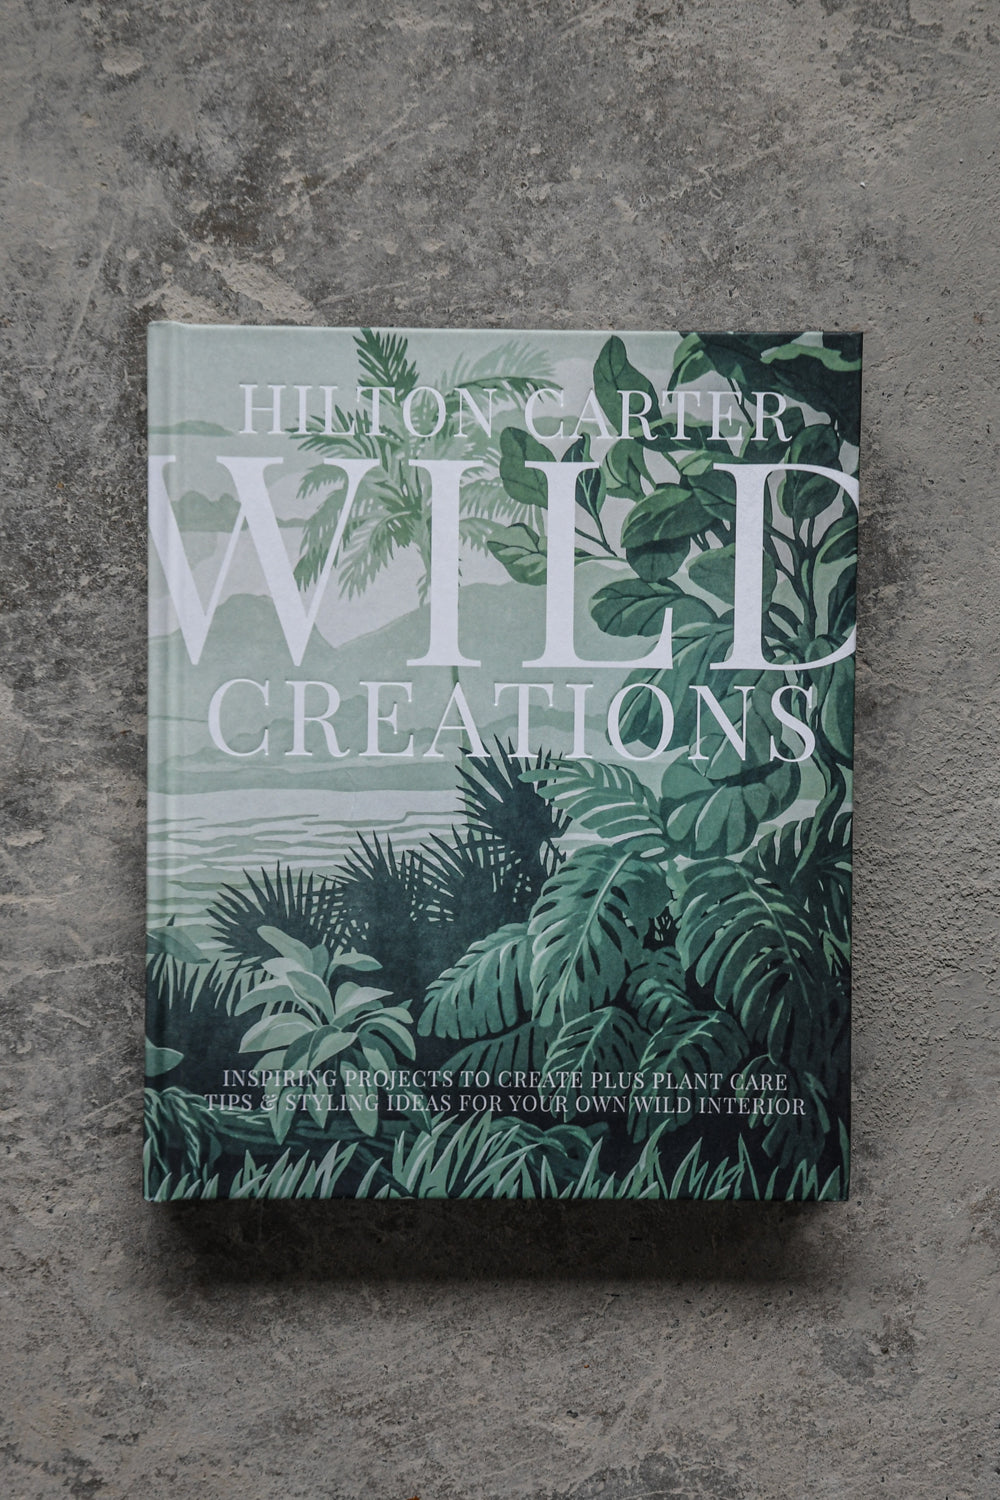 Wild Creations Book (SIGNED)